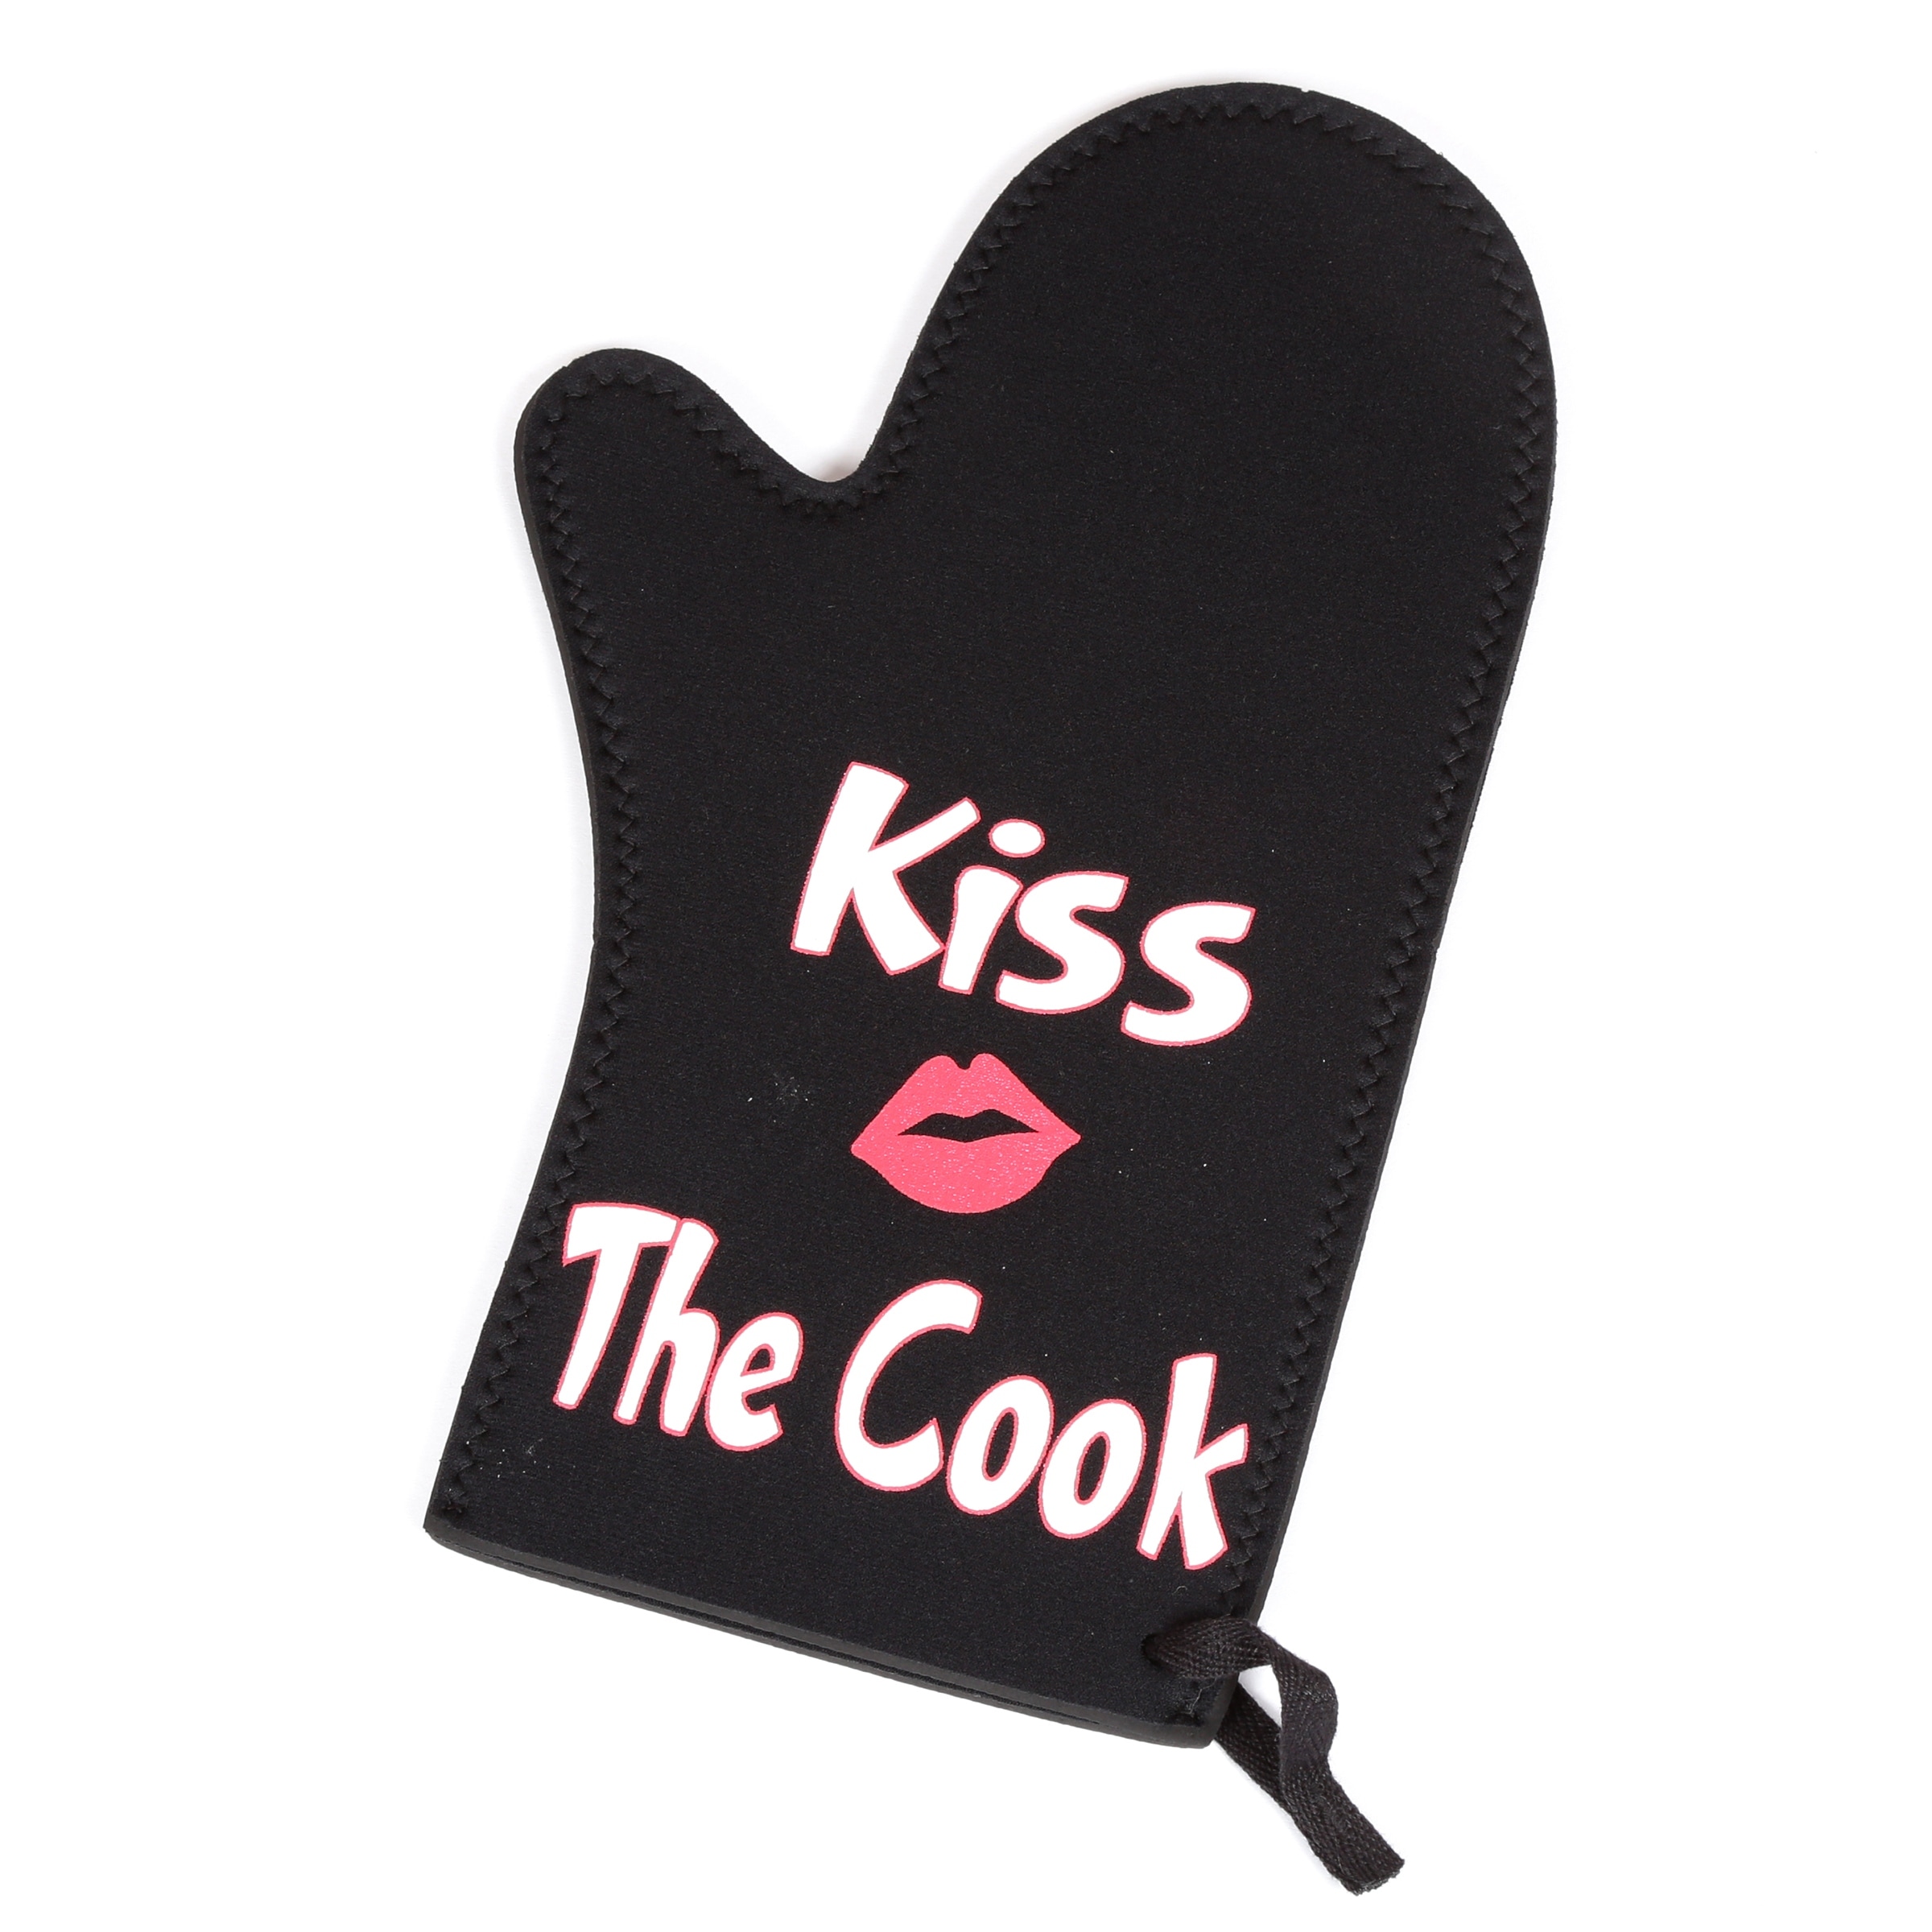 https://ak1.ostkcdn.com/images/products/is/images/direct/5e6b4d06bd66d99752d5a7ed54cfa309019b14f4/Creative-Home-Black-Neoprene-Oven-Mitt-Glove%2C-Insulated-for-Cooking-Baking-BBQ%2C-Heat-and-Cold-Resistant---Kiss-the-Cook-Print.jpg